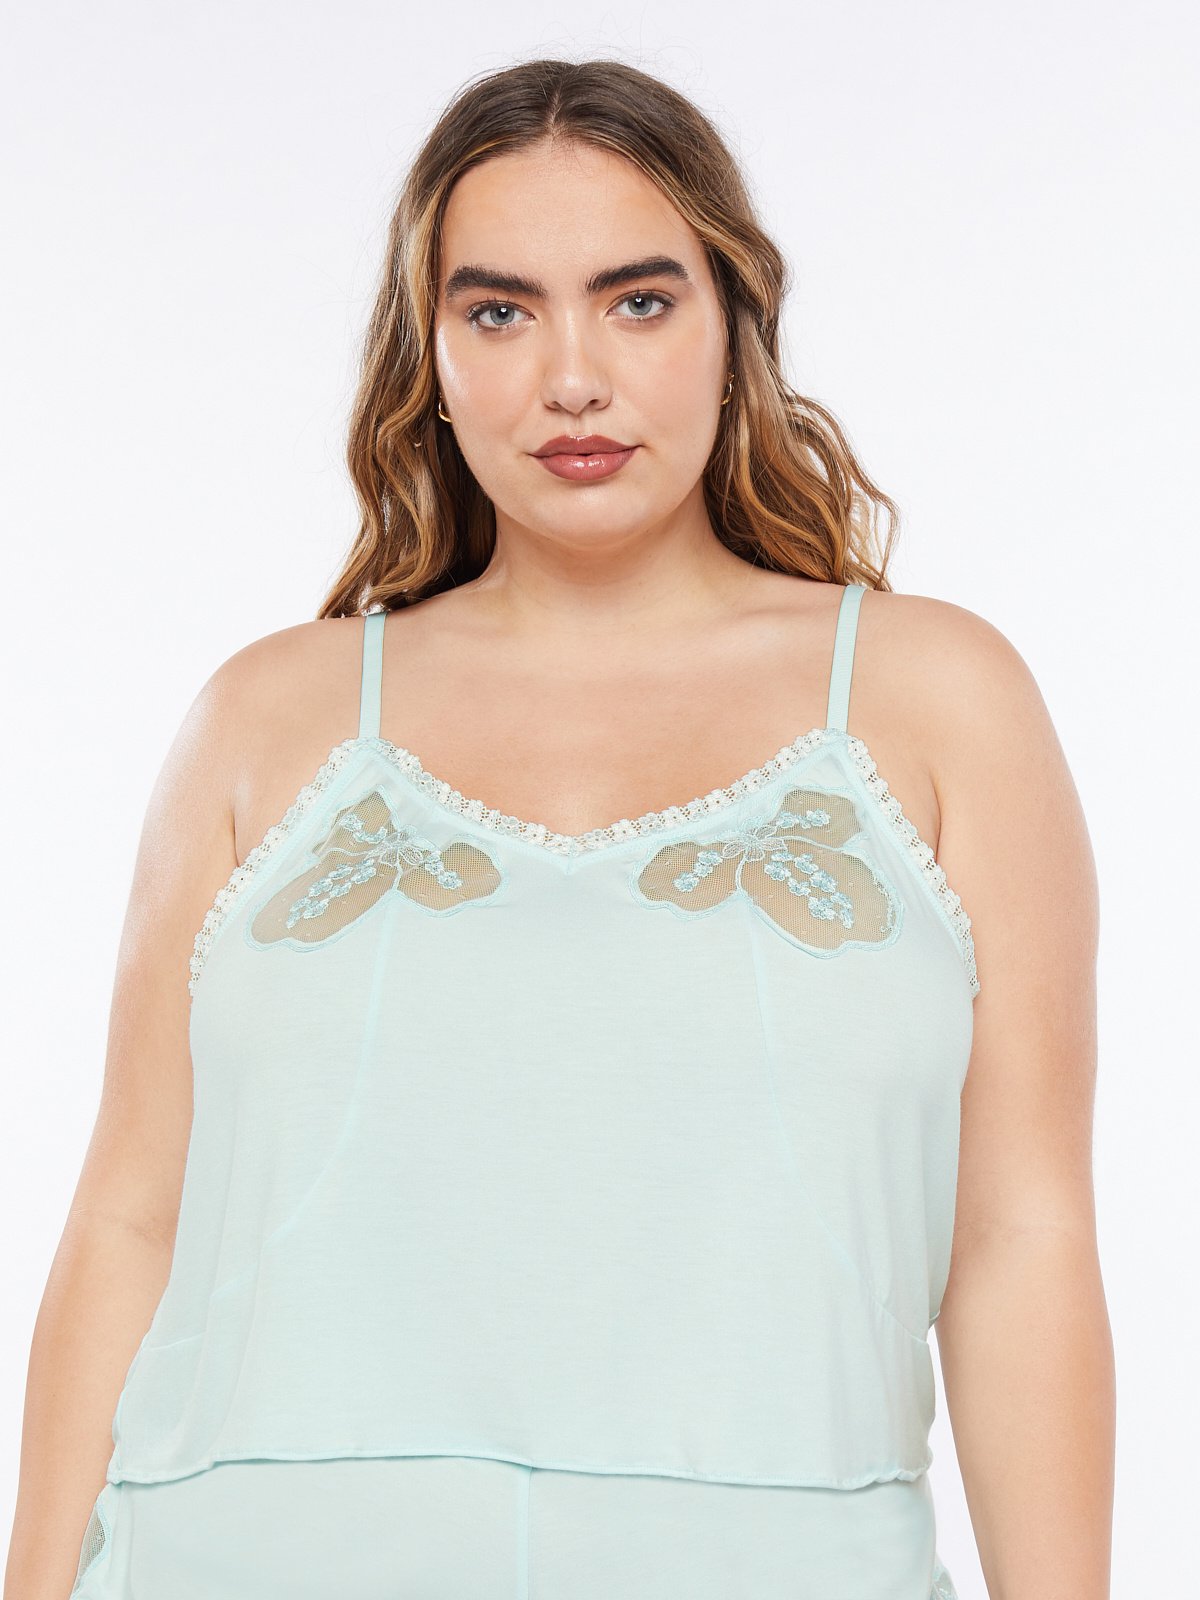 A Peek Behind the Lace Cami in Blue